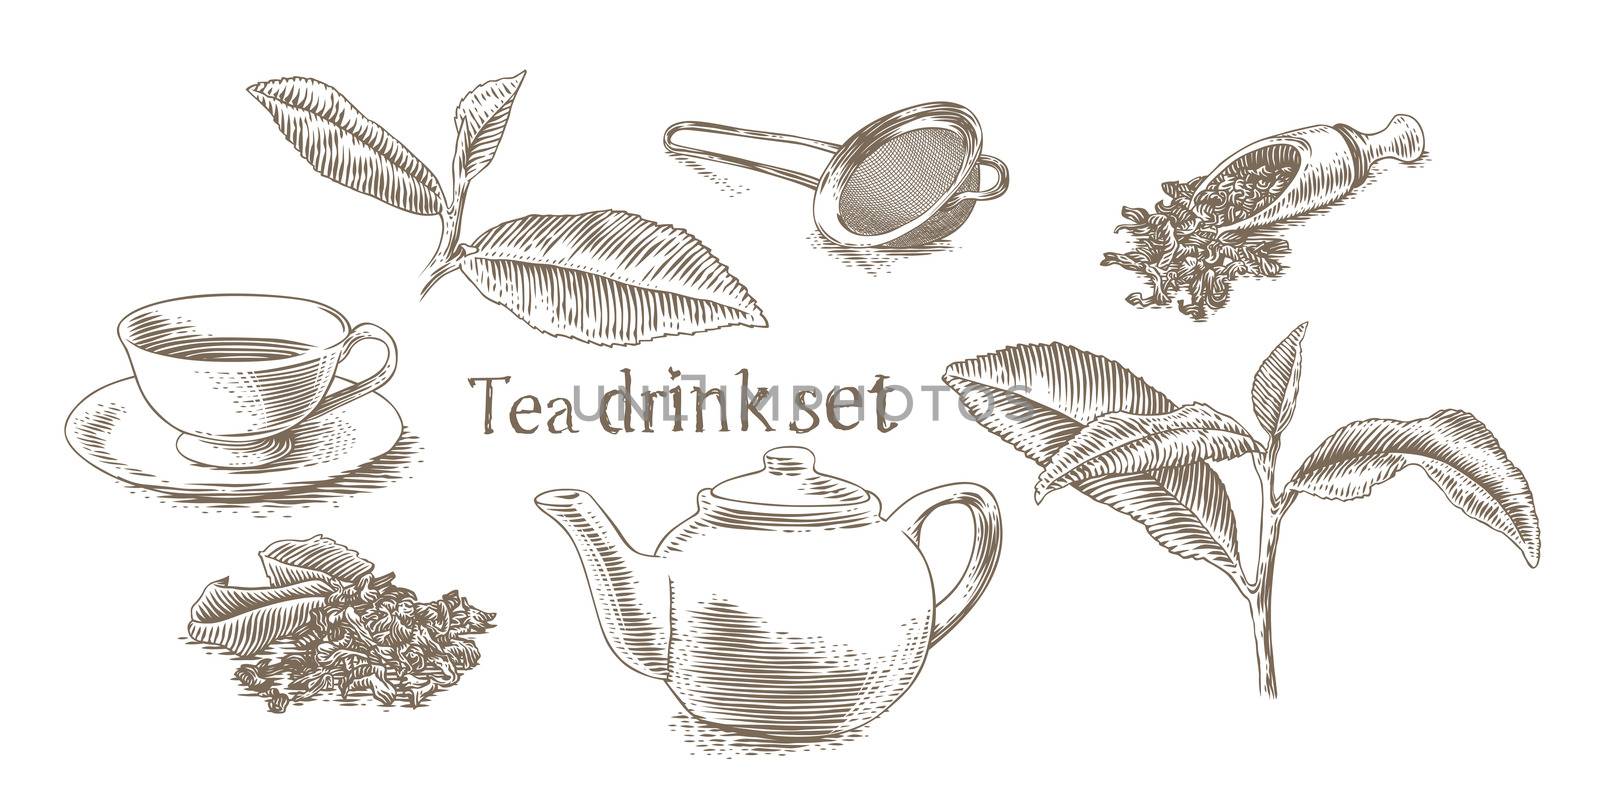 Tea drink picture set by Angorius